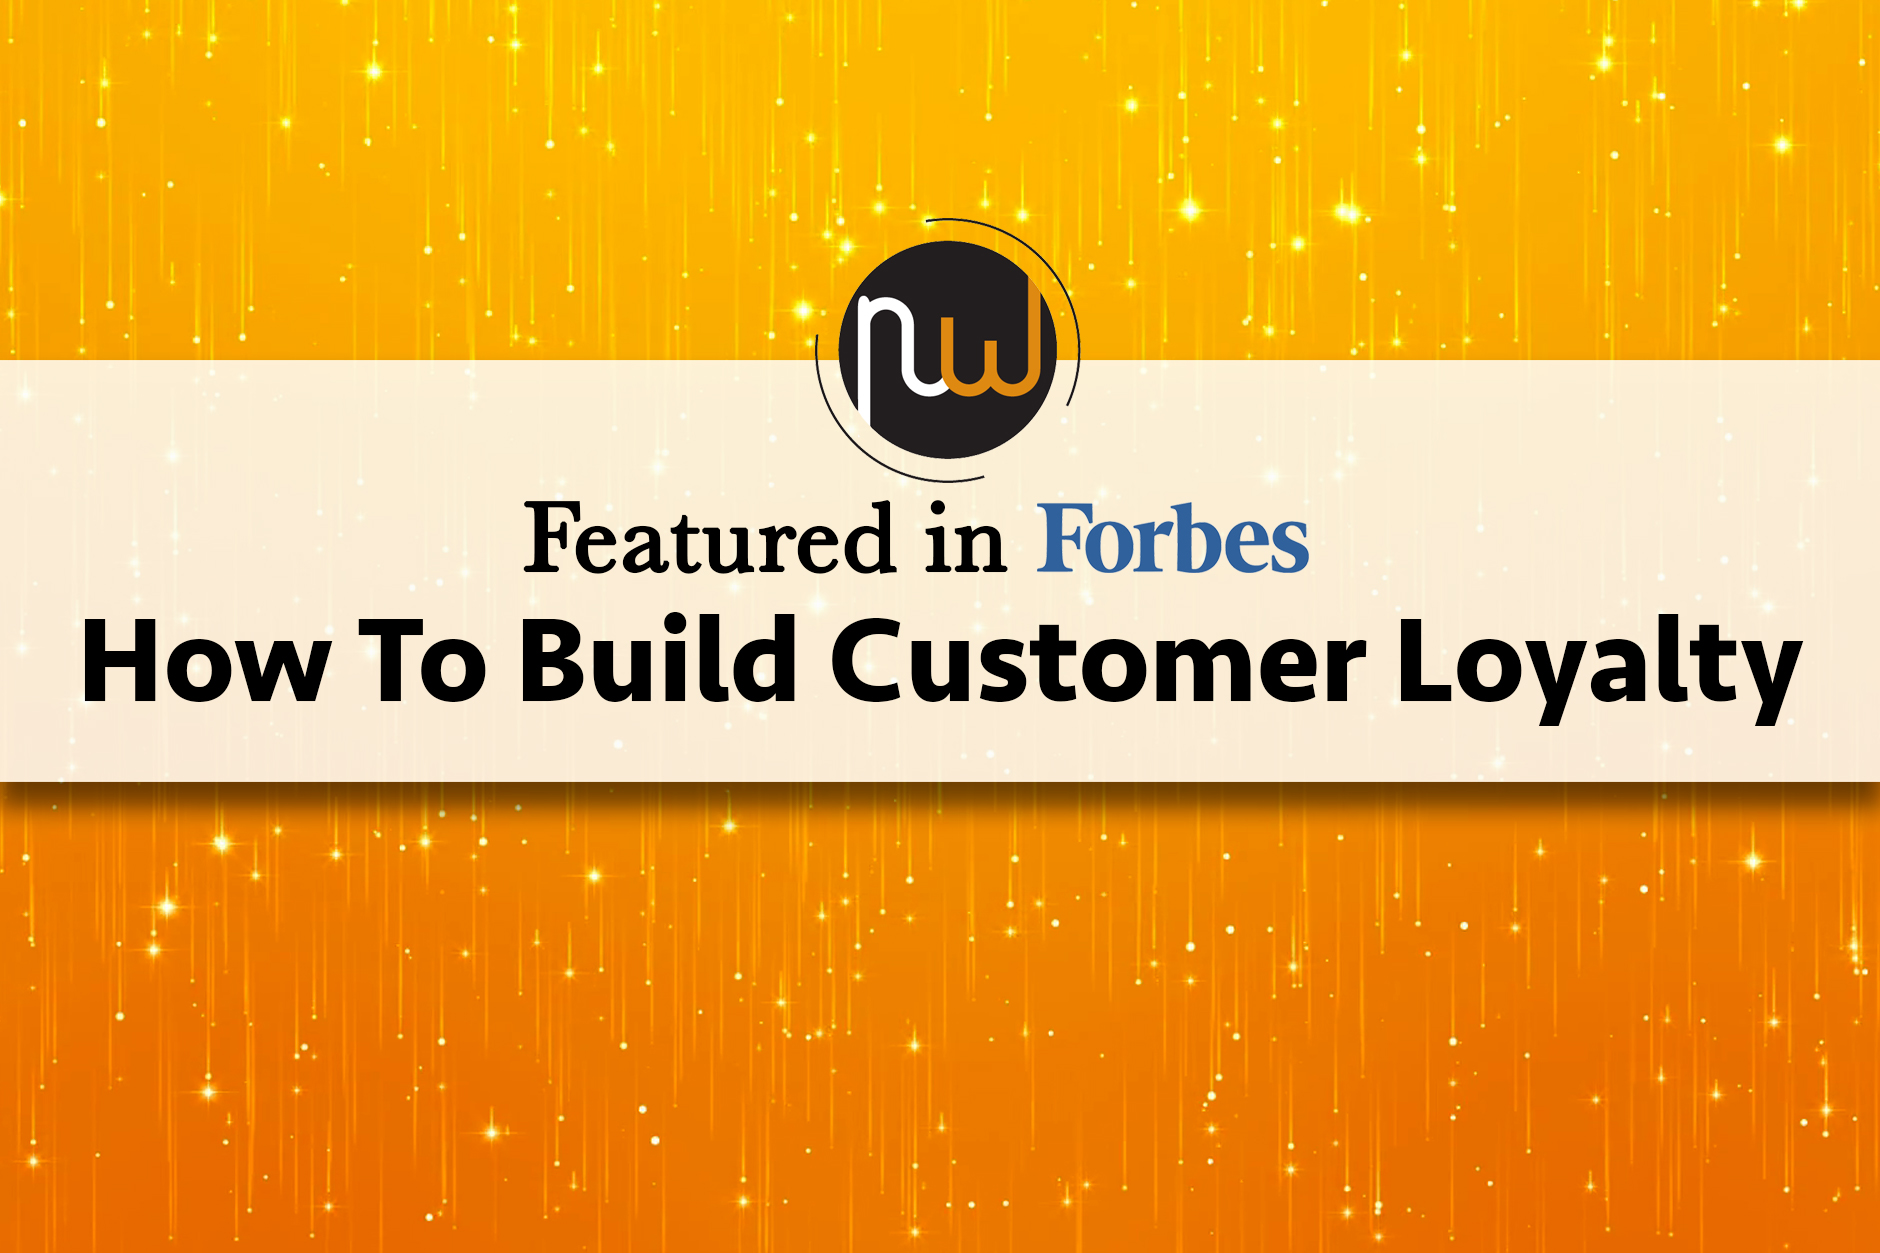 How To Build Customer Loyalty: Featured In Forbes